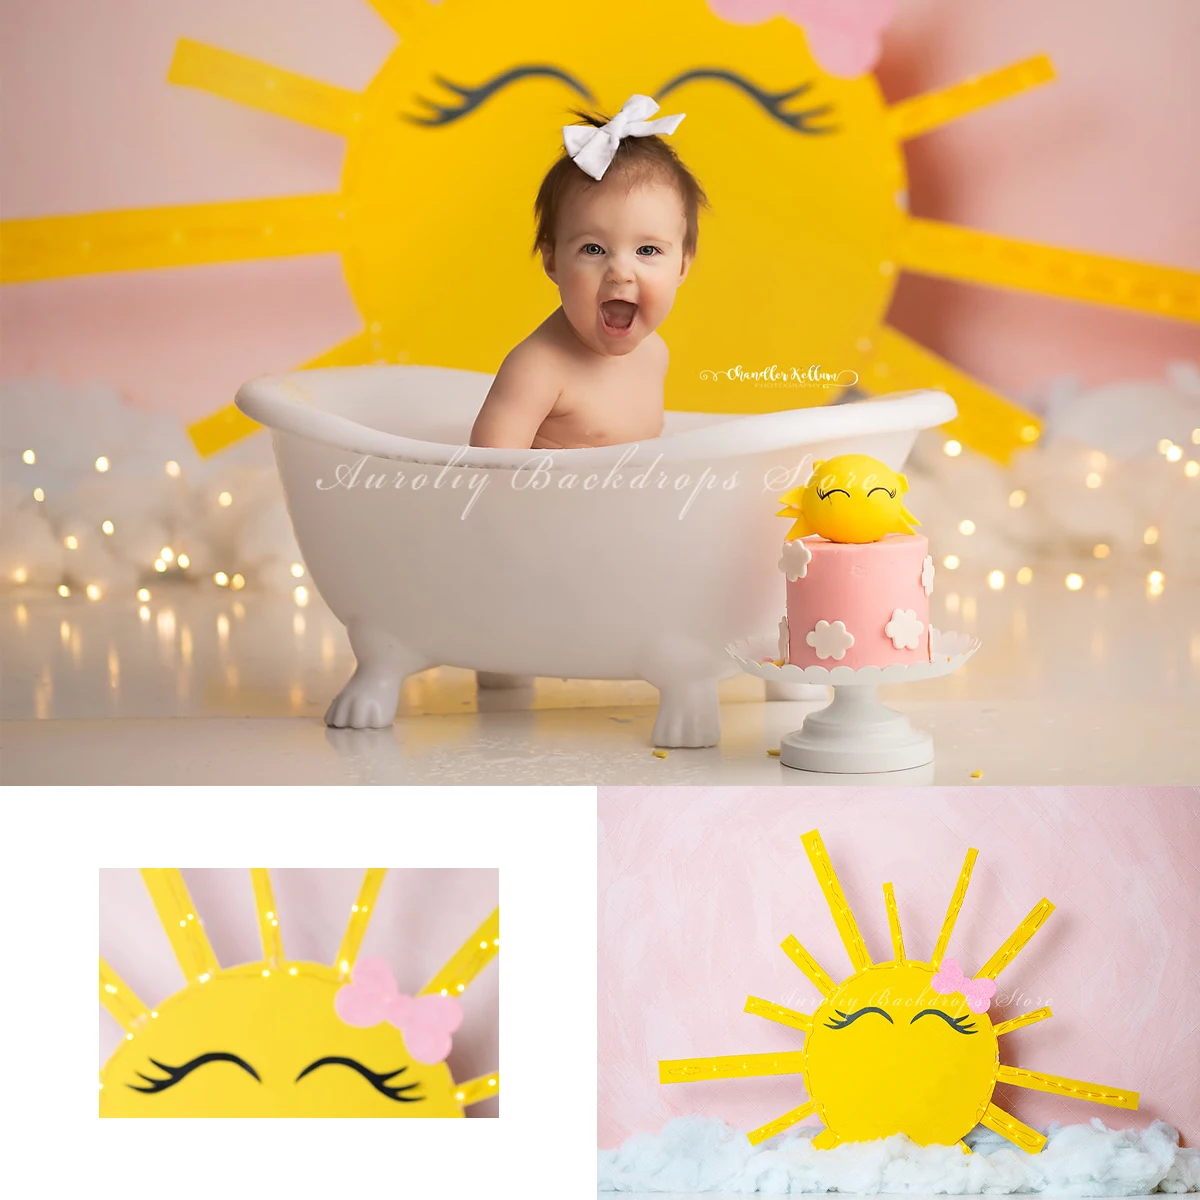 

Ray Of Sunshine Backgrounds Cake Smash Kids Adult Photography Props Child Baby Decors Sun In The Clouds Photo Backdrops